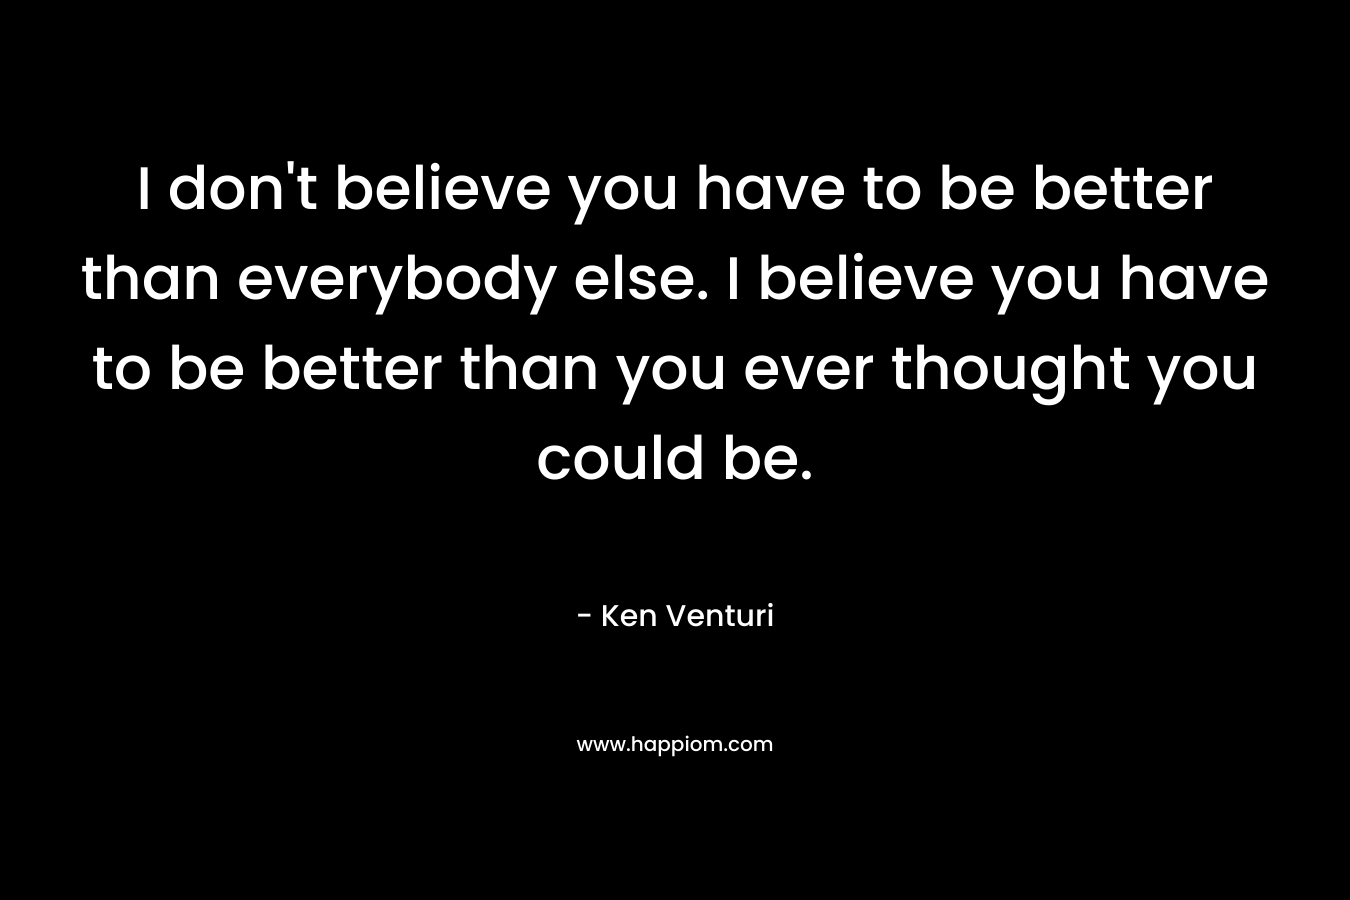 I don't believe you have to be better than everybody else. I believe you have to be better than you ever thought you could be.